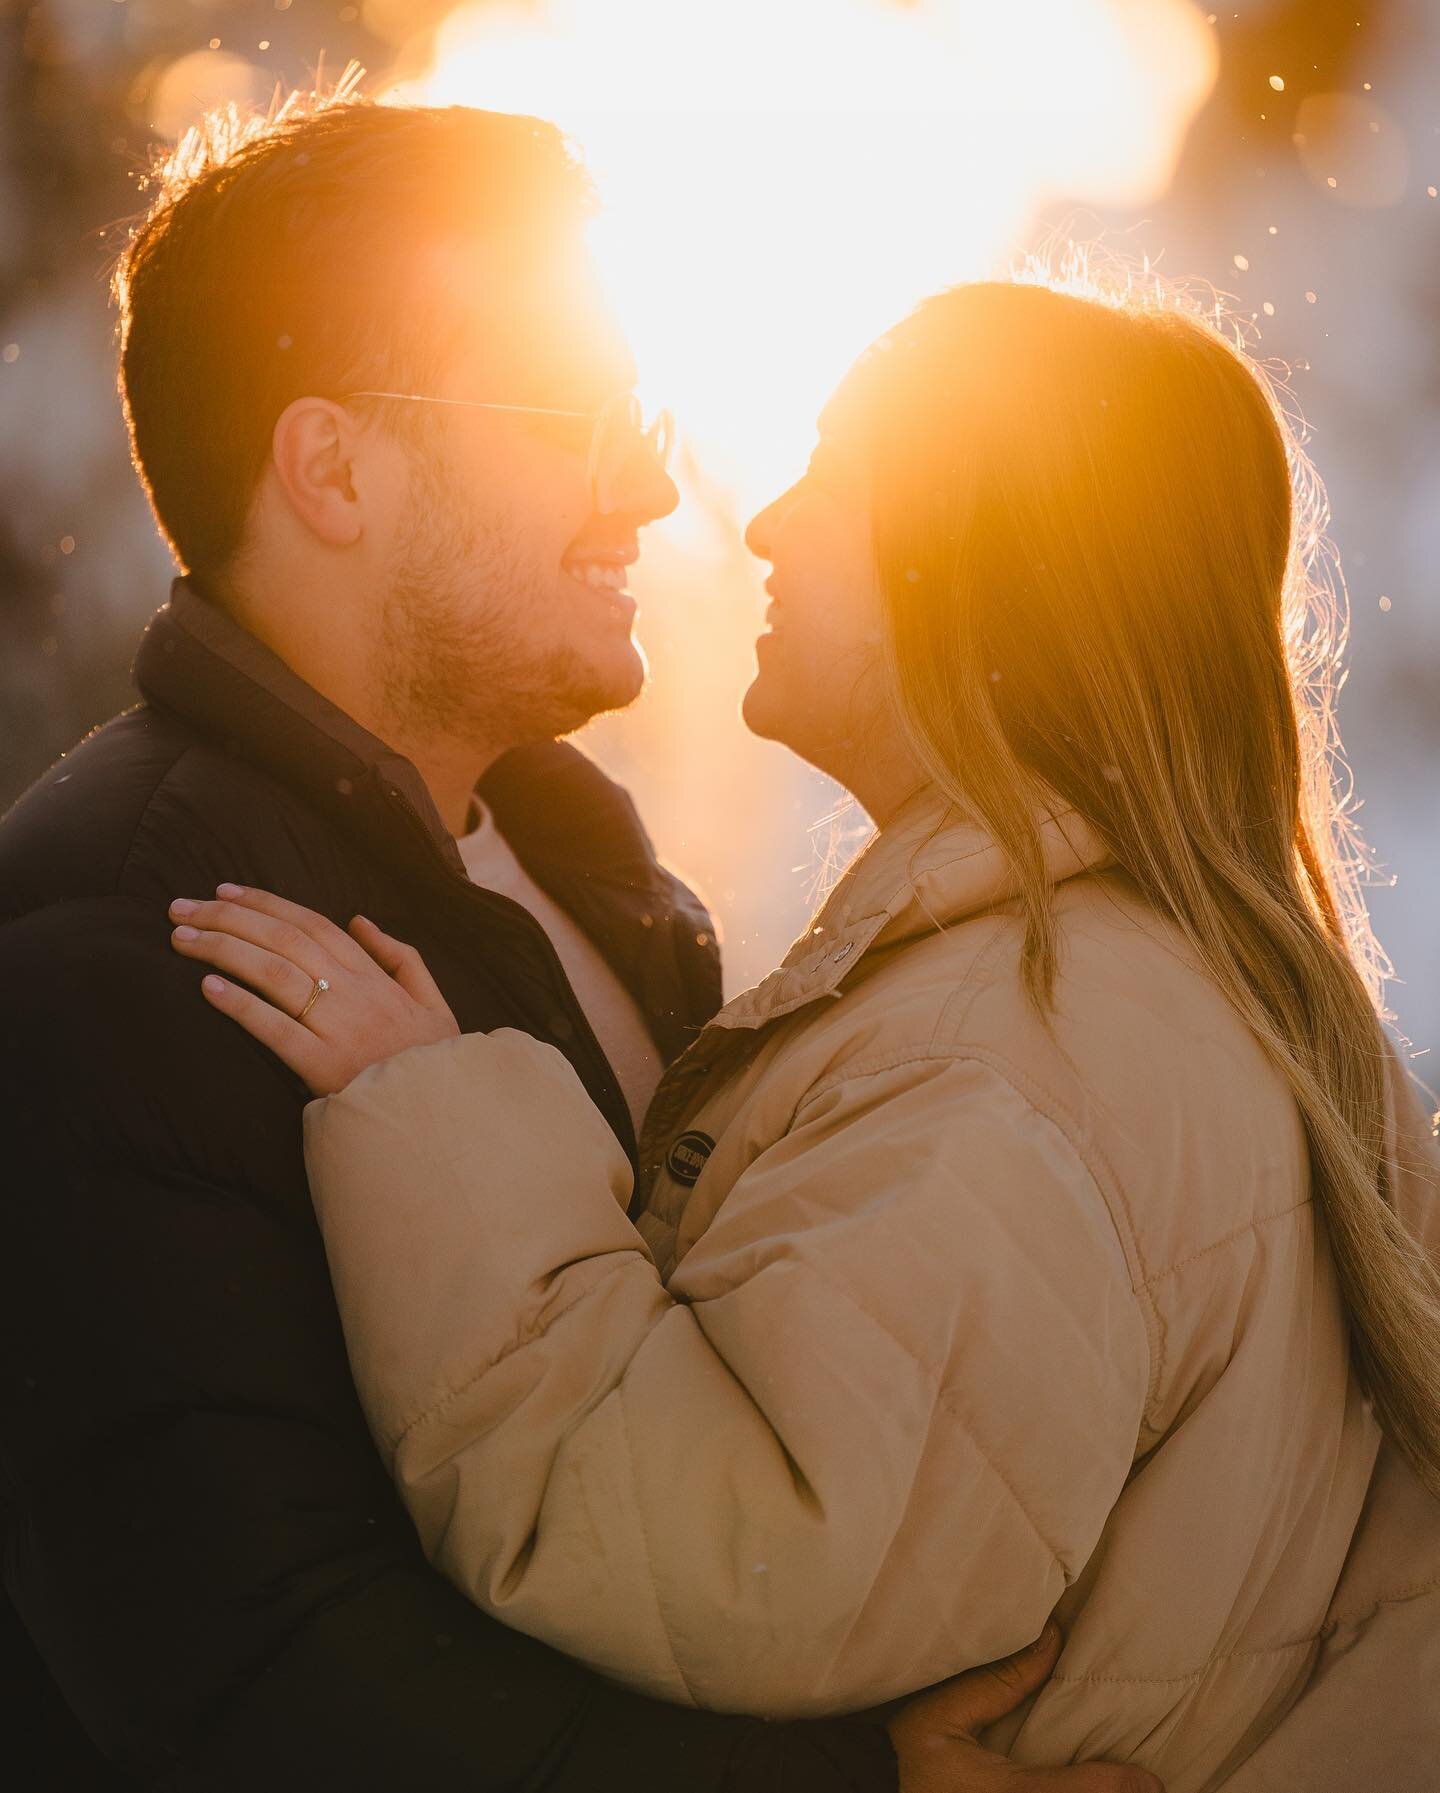 Rovaniemi sure showed it&rsquo;s most beautiful light and magic yesterday when Isaac &amp; Jessica got engaged ❤️ I&rsquo;m so happy that I got to meet you two lovebirds❤️ ✨ #visitrovaniemi #romanticrovaniemi #proposal #engagementshoot #laplandengage